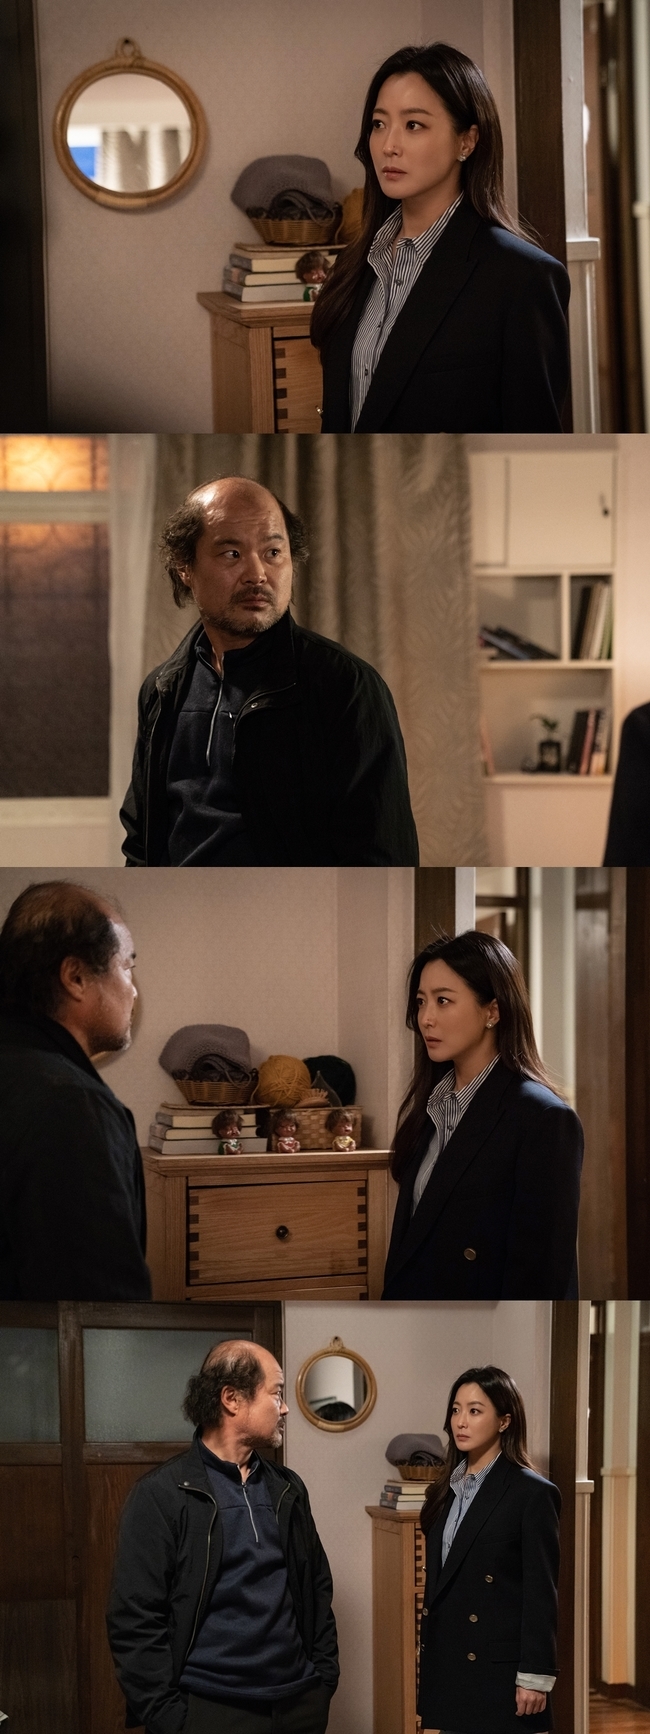 Kim Hee-sun to dig into Secret and Kim Sang-ho to hide face off tenselySBSs Drama Alice (playplayed by Kim Gyu-won, Kang Cheol-gyu, and Kim Ga-young/directed by Baek Soo-chan) once again reveals the images of Yoon Tae-i and Ko Hyung-seok facing subtle tension on October 9 to draw attention.Alice is a story that repeats the reversal and is holding the audiences breath.In particular, while Kim Sang-ho, who Park Jin-gyeom (played by Joo Won) believes and follows like his father, emerged as a suspect, Yoon Tae-yi caught the suspicious aspect of Ko Hyung-seok and began to press him.Yoon Tae-yi and Ko Hyung-seok in the public photos face Park Jin-gums old house.This is where Park Jin-gyeoms mother, Park Sun-young, lived with Park Jin-gyeom until 2010, and where Yoon Tae-yi and Park Jin-gyeom lived together for safety in the threat of time travelers in 2020.There is a strong question about why Yoon Tae-yi and Ko Hyung-seok faced each other in this meaningful place for various reasons.Above all, the tension surrounding Yoon Tae-yi and Ko Hyung-seok in the photo attracts attention. Yoon Tae-yi is looking at Ko Hyung-seok with sharp eyes as if he is wary.So, he also fixed his gaze on Yoon Tae-yi without revealing Feeling. Yoon Tae-yi and Secret, who try to reveal Secret, are trying to hide.Just standing face to face and looking at each other makes me feel tense, making me wait for the 11th episode of Alice.bak-beauty